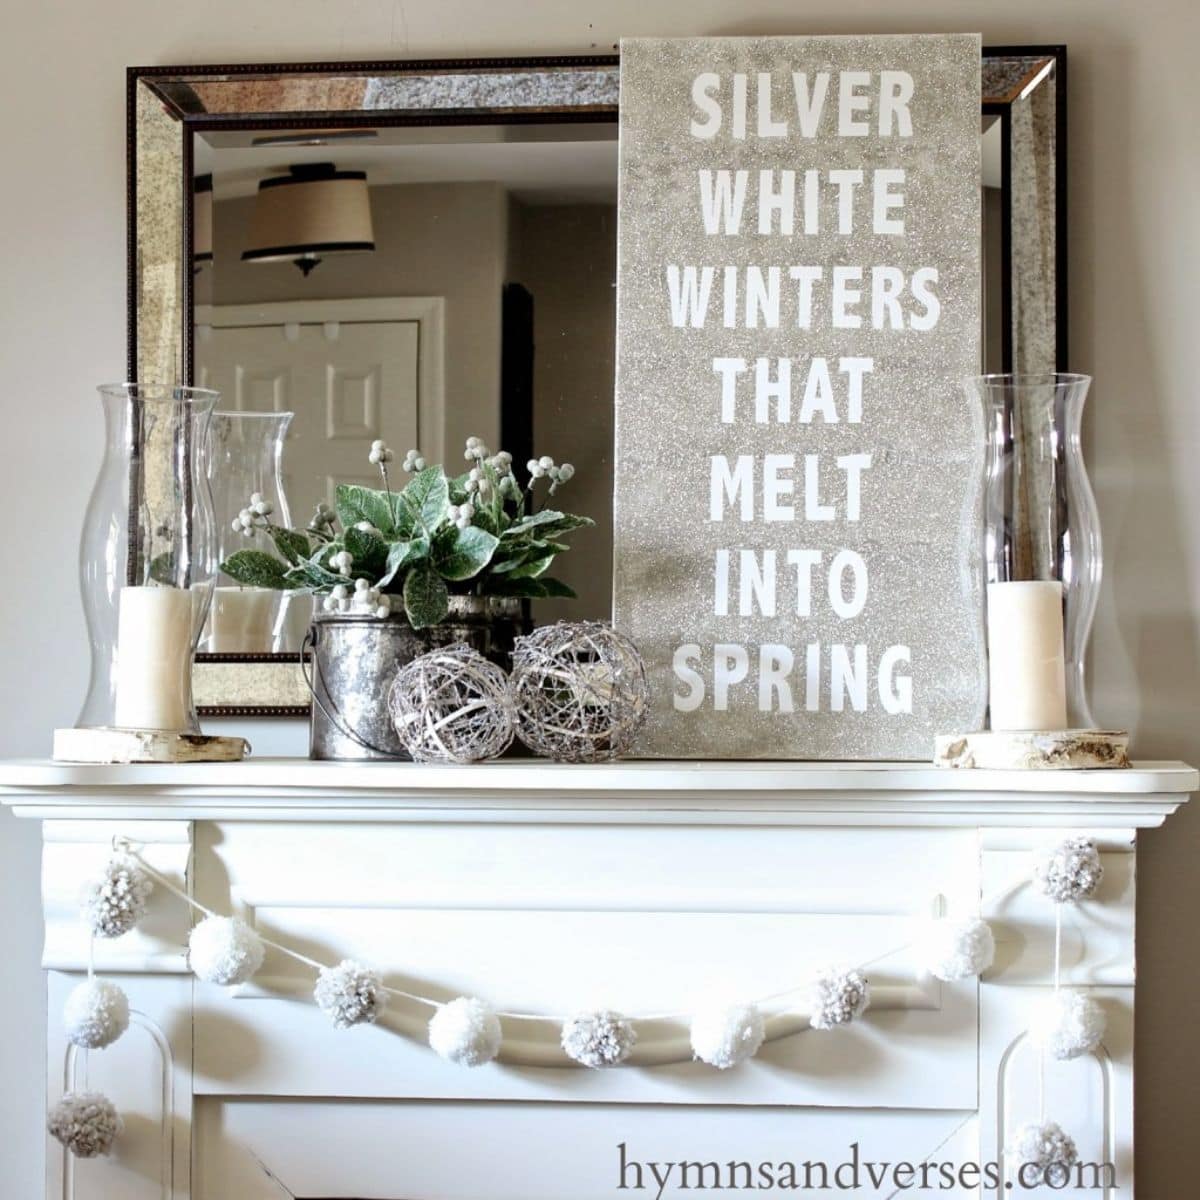 On a white mantelpiece in front of a mirror is a sign with white letters that reads "Silver white winters that melt into spring"